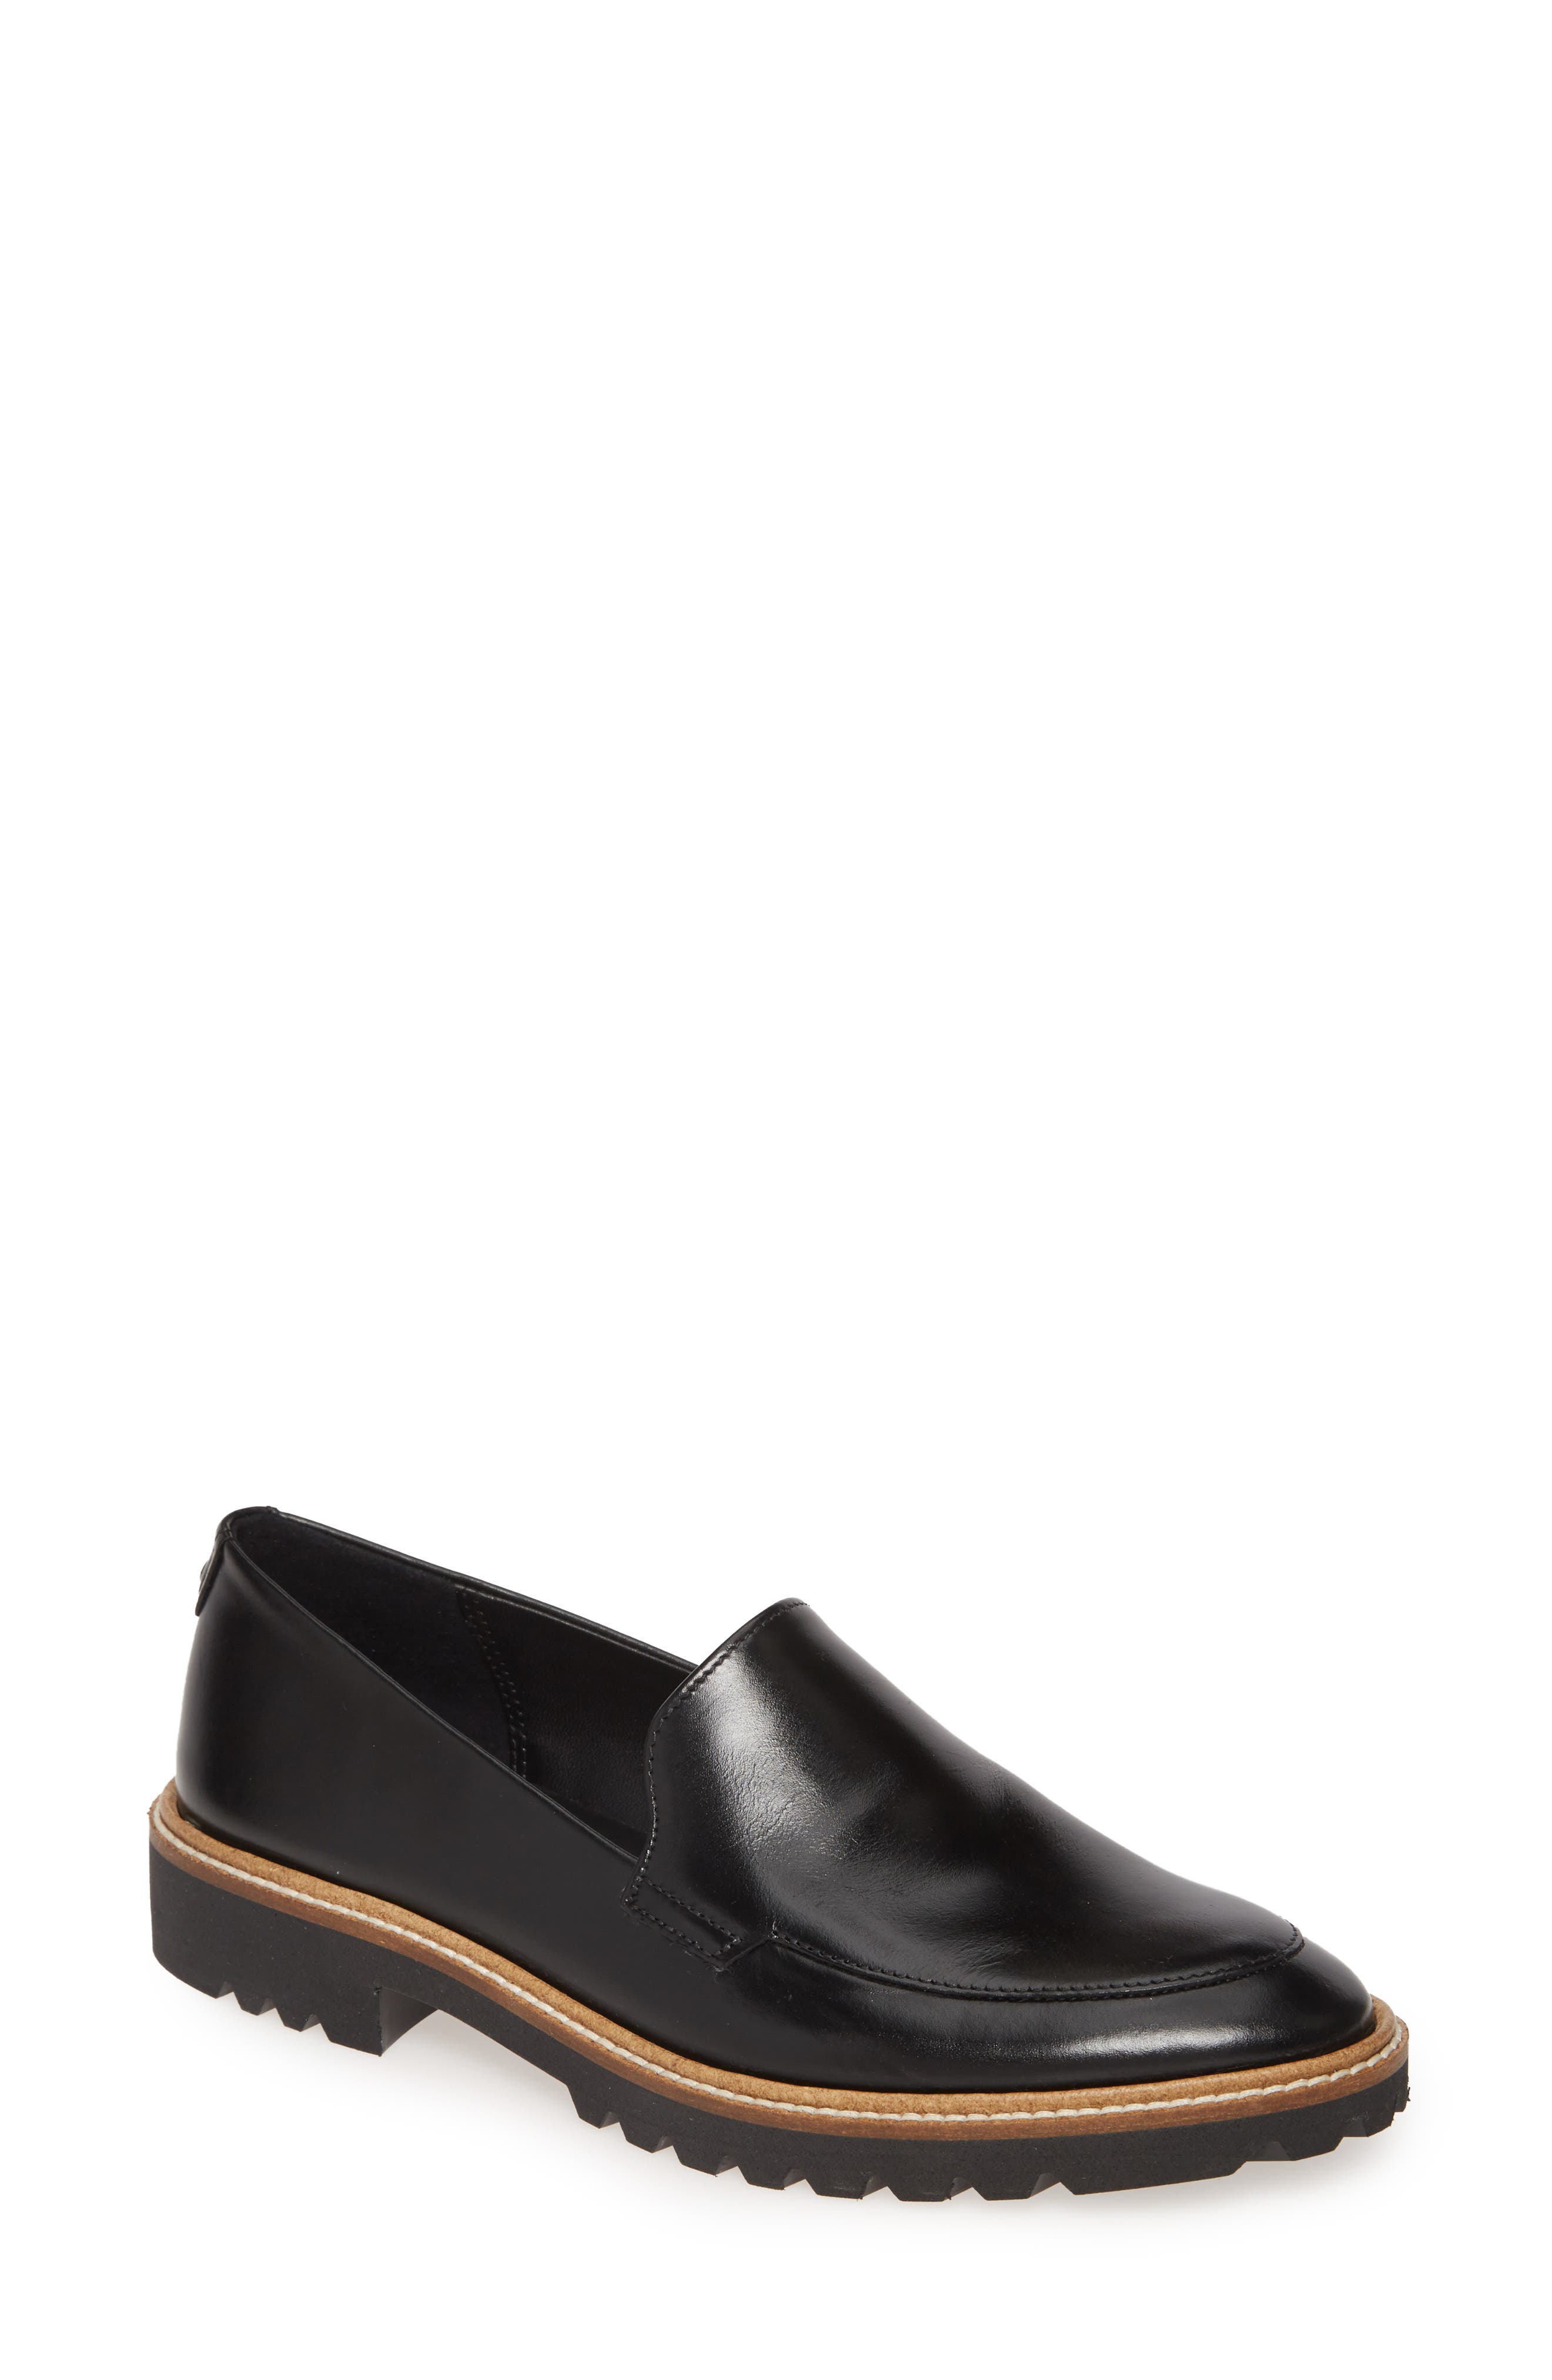 loafer womens shoes